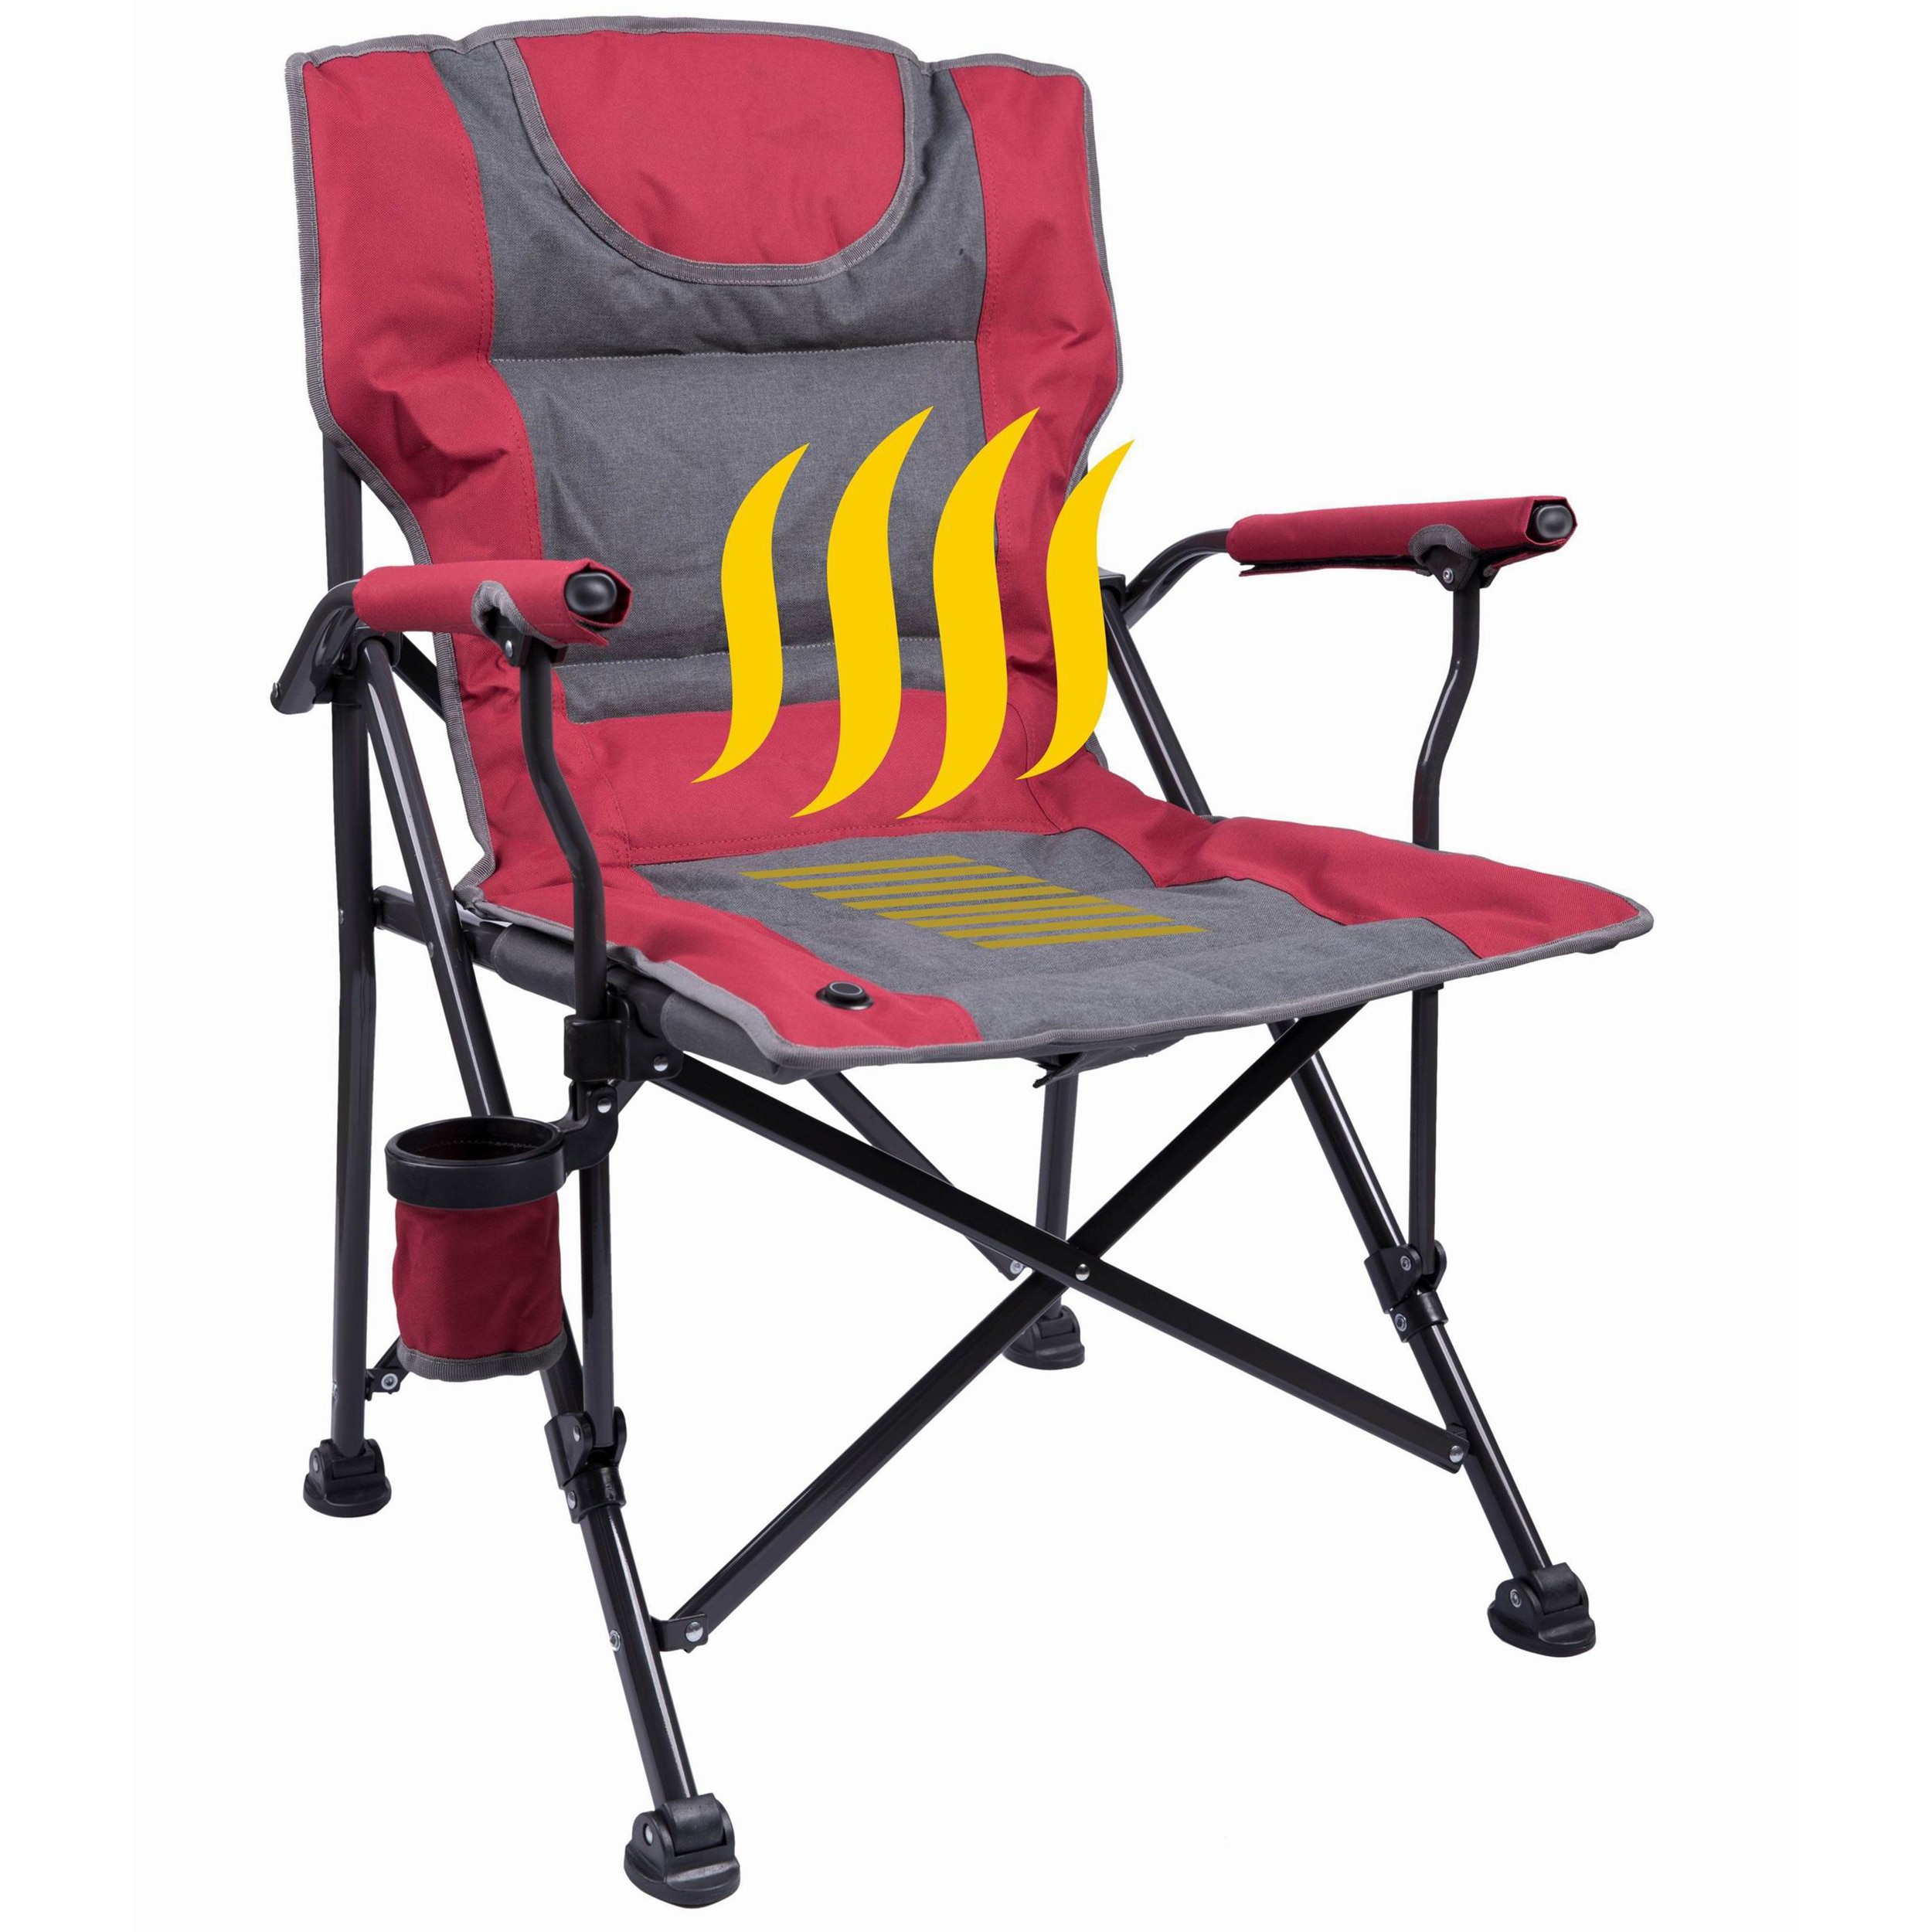 All-Season Camping Chair for Adults Heavy Duty with Large Storage Space,  Removable Heated Cushion, 3 Heating Levels, Suitable for Outdoor, Lawn, Ice